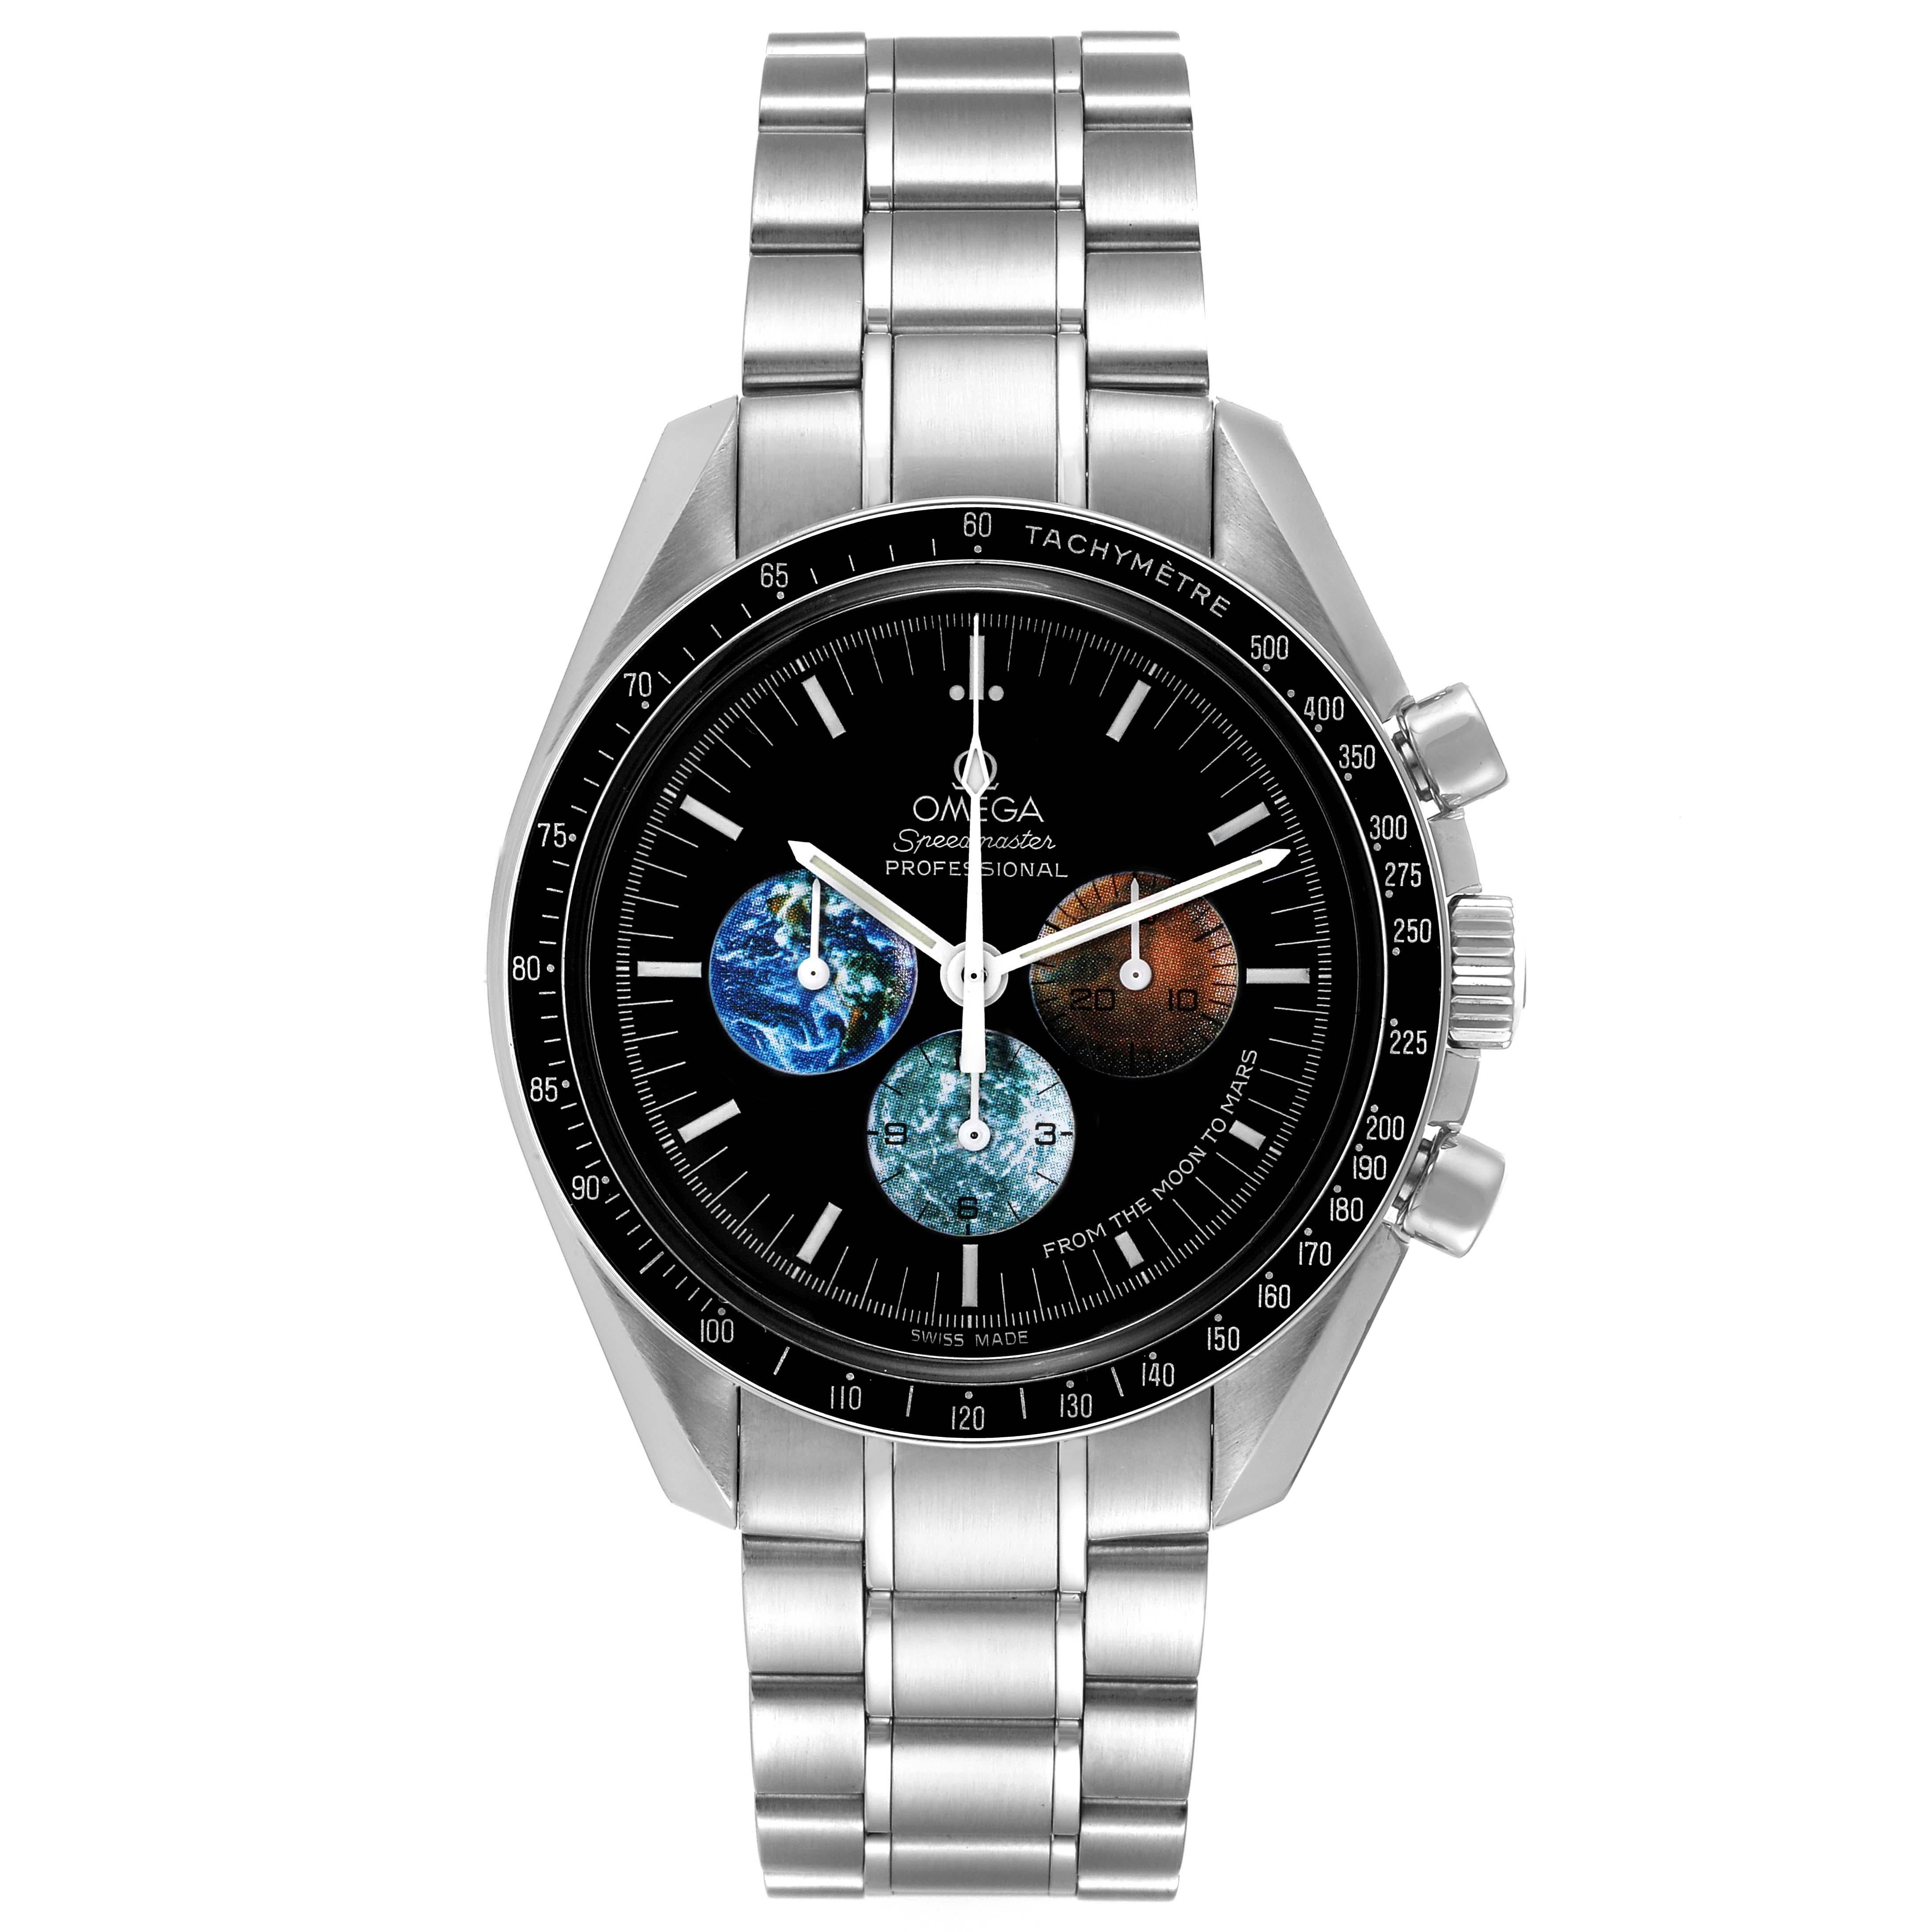 Omega Speedmaster Limited Edition Moon to Mars Steel Mens Watch 3577.50.00. Manual-winding chronograph movement. Stainless steel round case 42.0 mm in diameter. Stainless steel bezel with black tachymeter insert. Hesalite acrylic crystal. Black dial